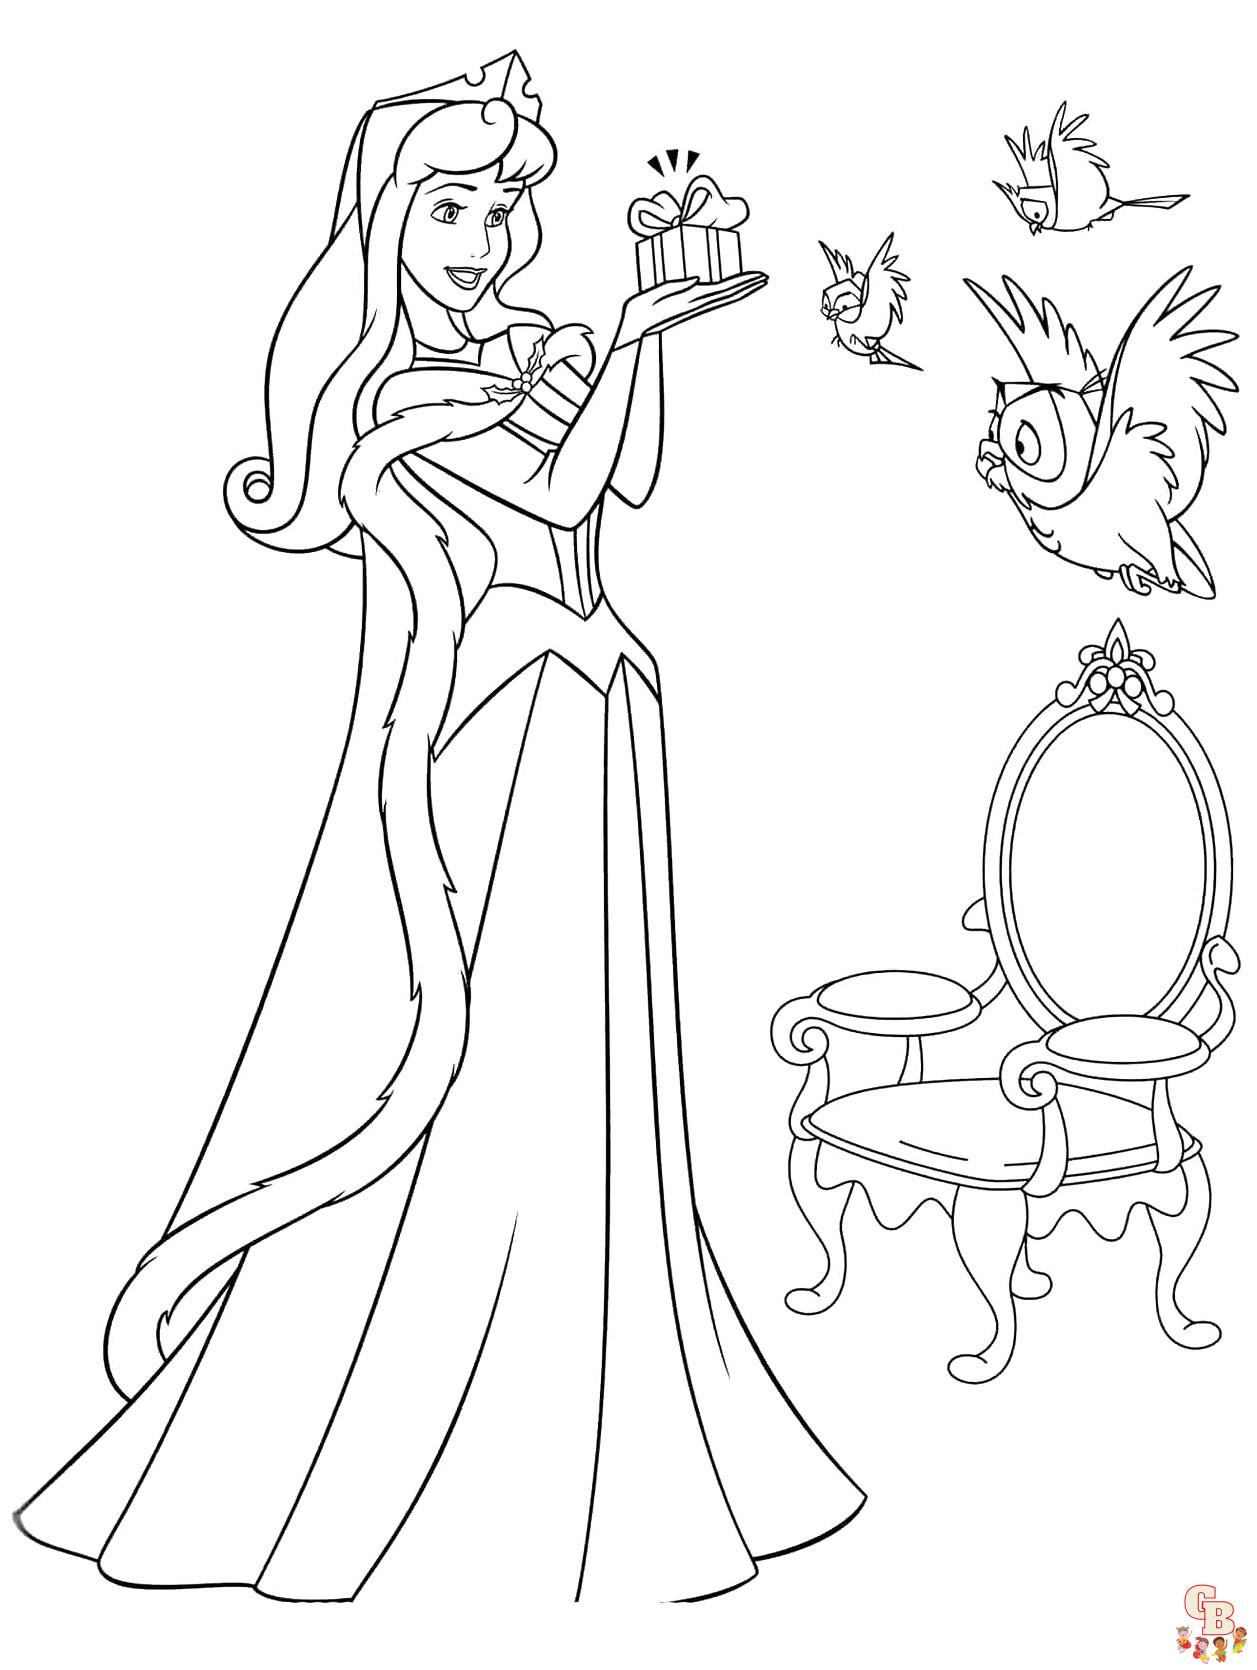 Aurora Coloring Pages 37